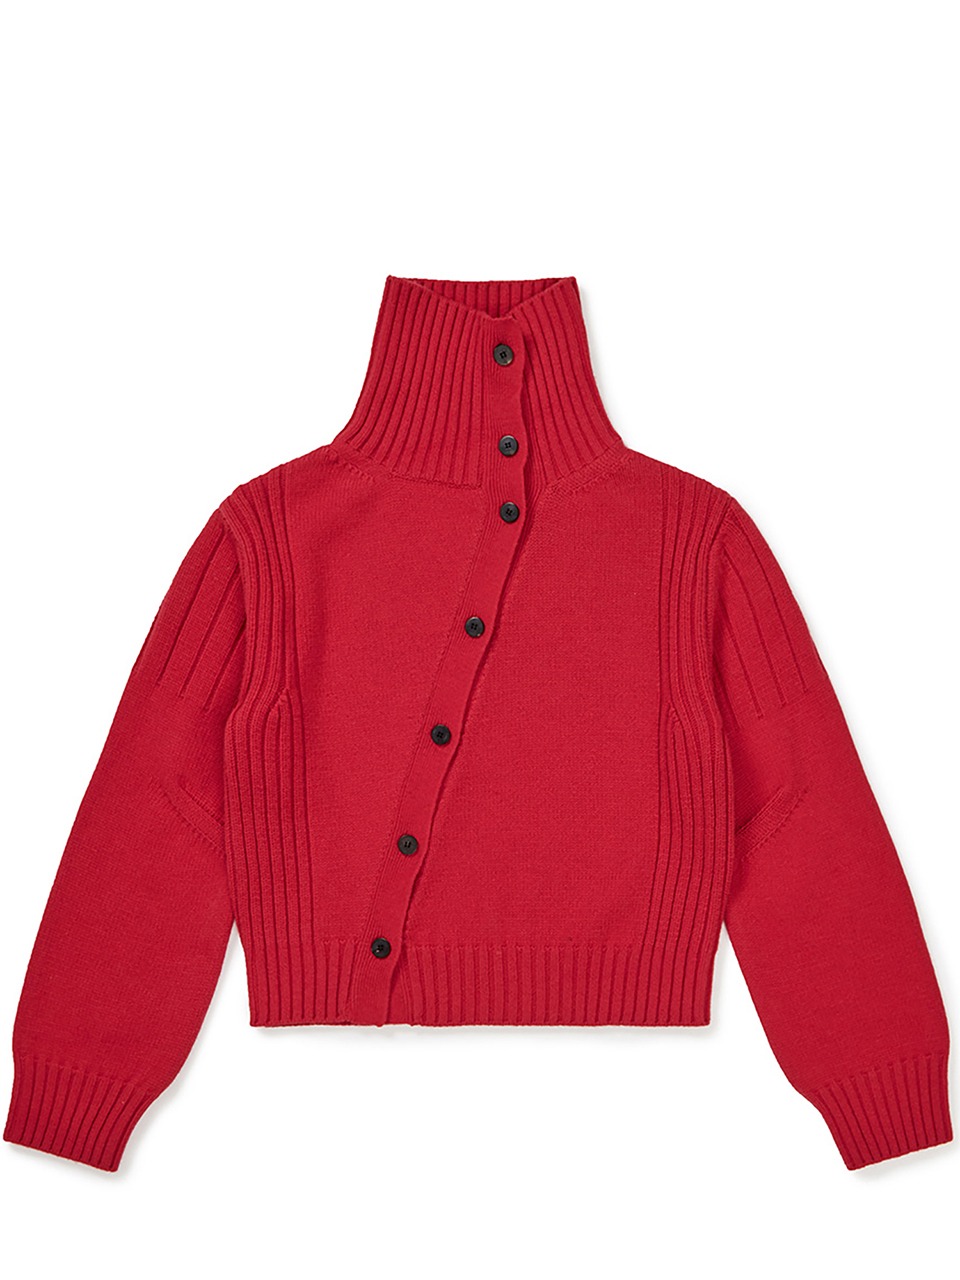 MMIC - CROOKED CARDIGAN  (RED)